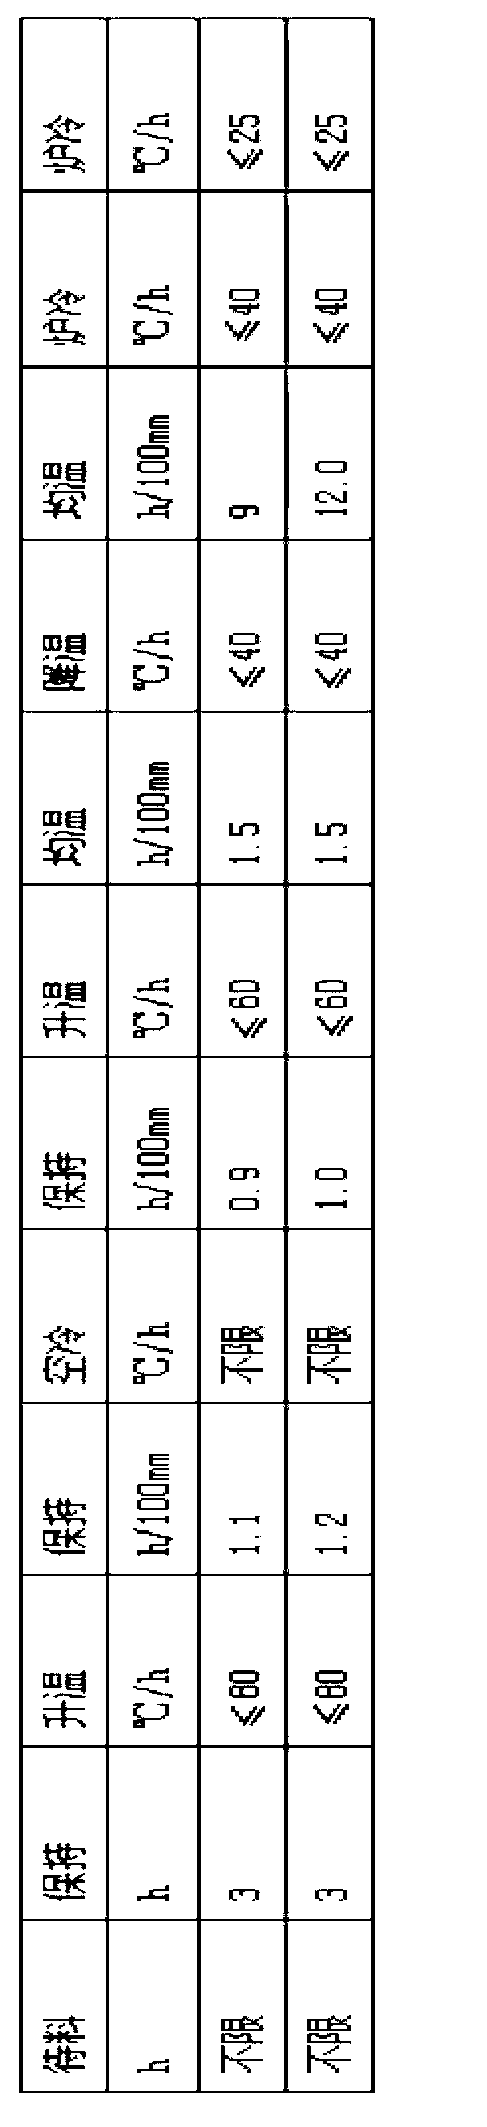 After-forging hydrogen diffusion and annealing method of forging material